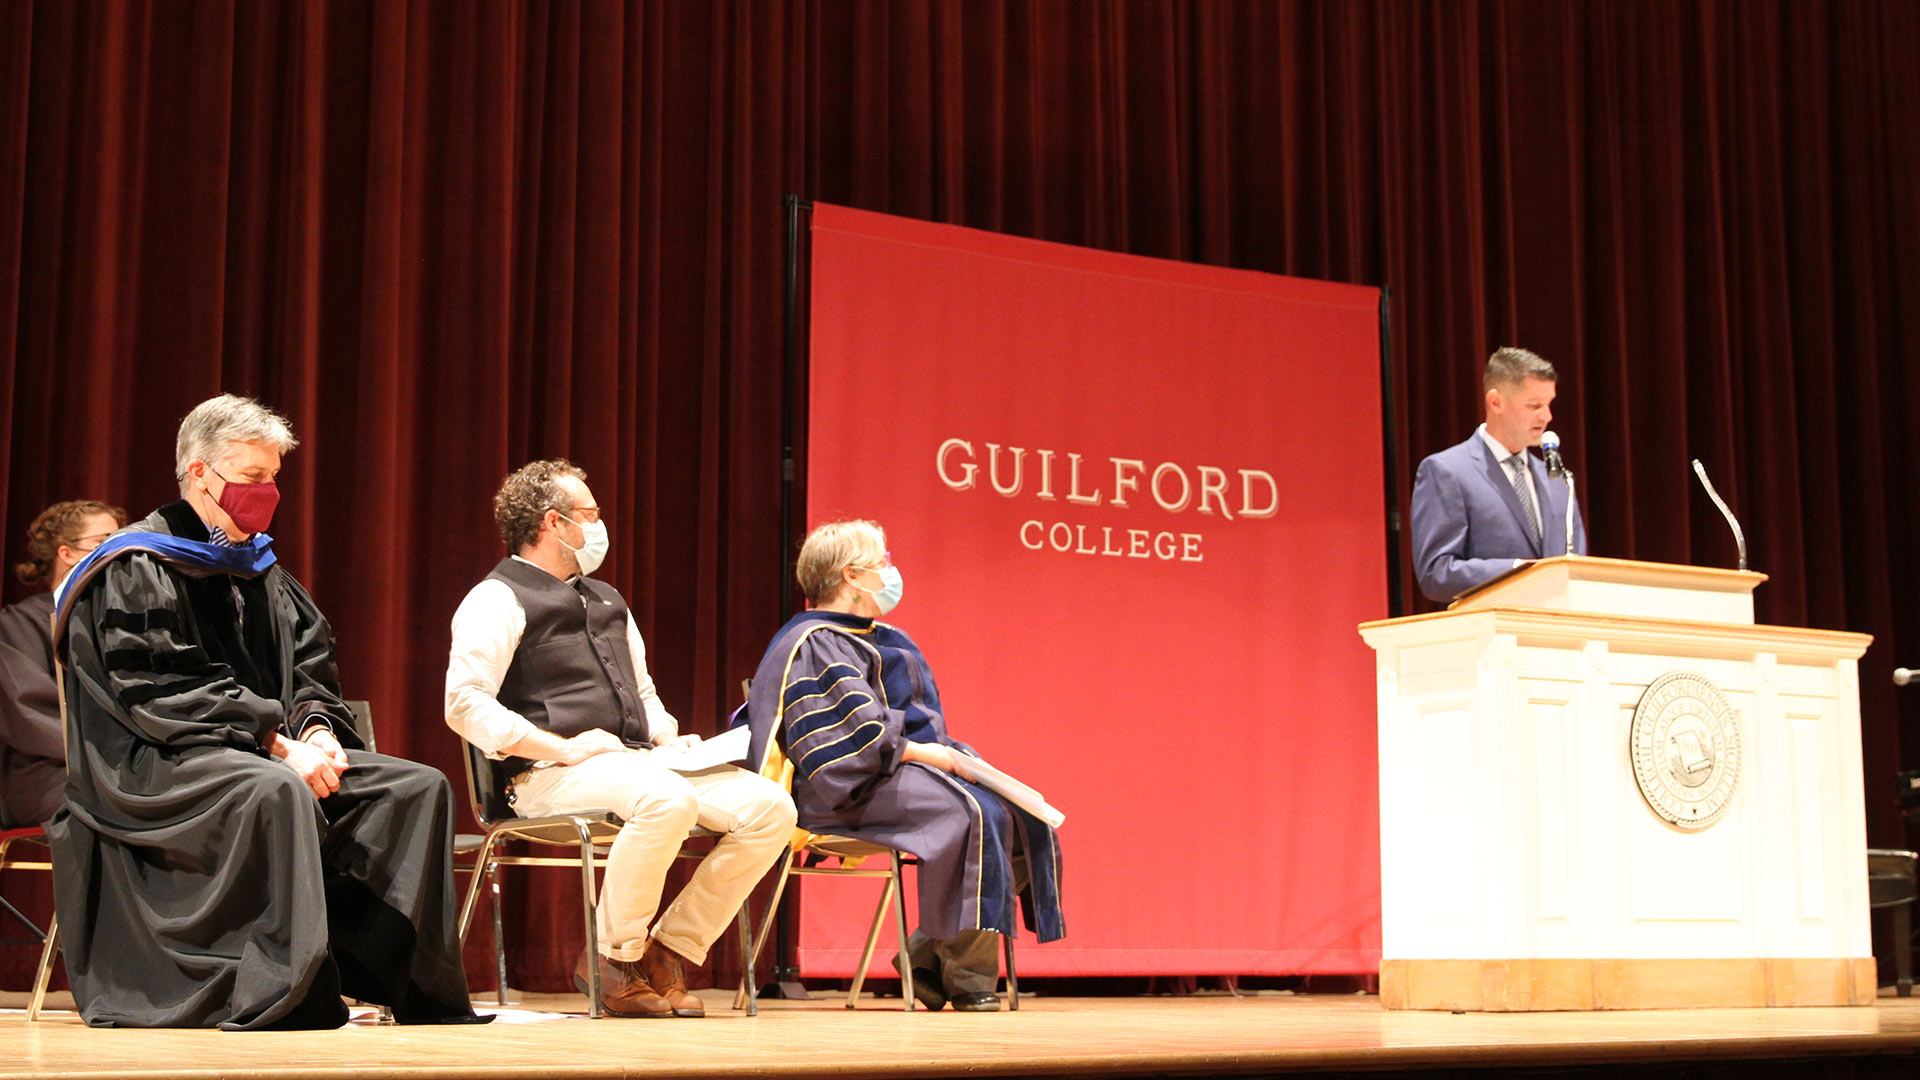 Guilford alumni Tracy Russ '90 speaks from the podium.